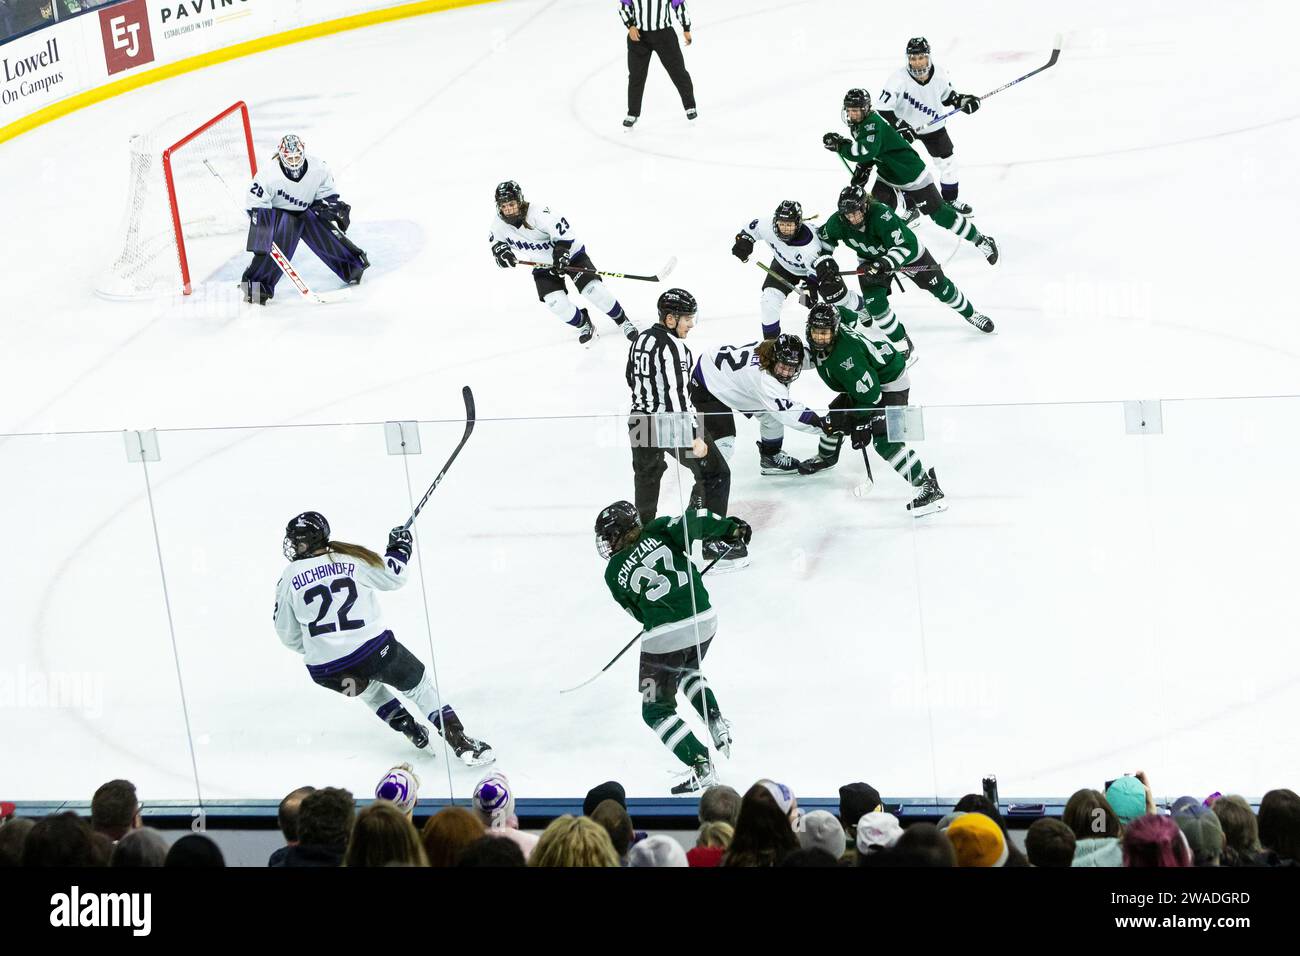 Tsongas Center. 3rd Jan, 2024. Massachusetts, USA; Teams competed in a PWHL game between Boston and Minnesota at Tsongas Center. (c) Burt Granofsky/CSM/Alamy Live News Stock Photo